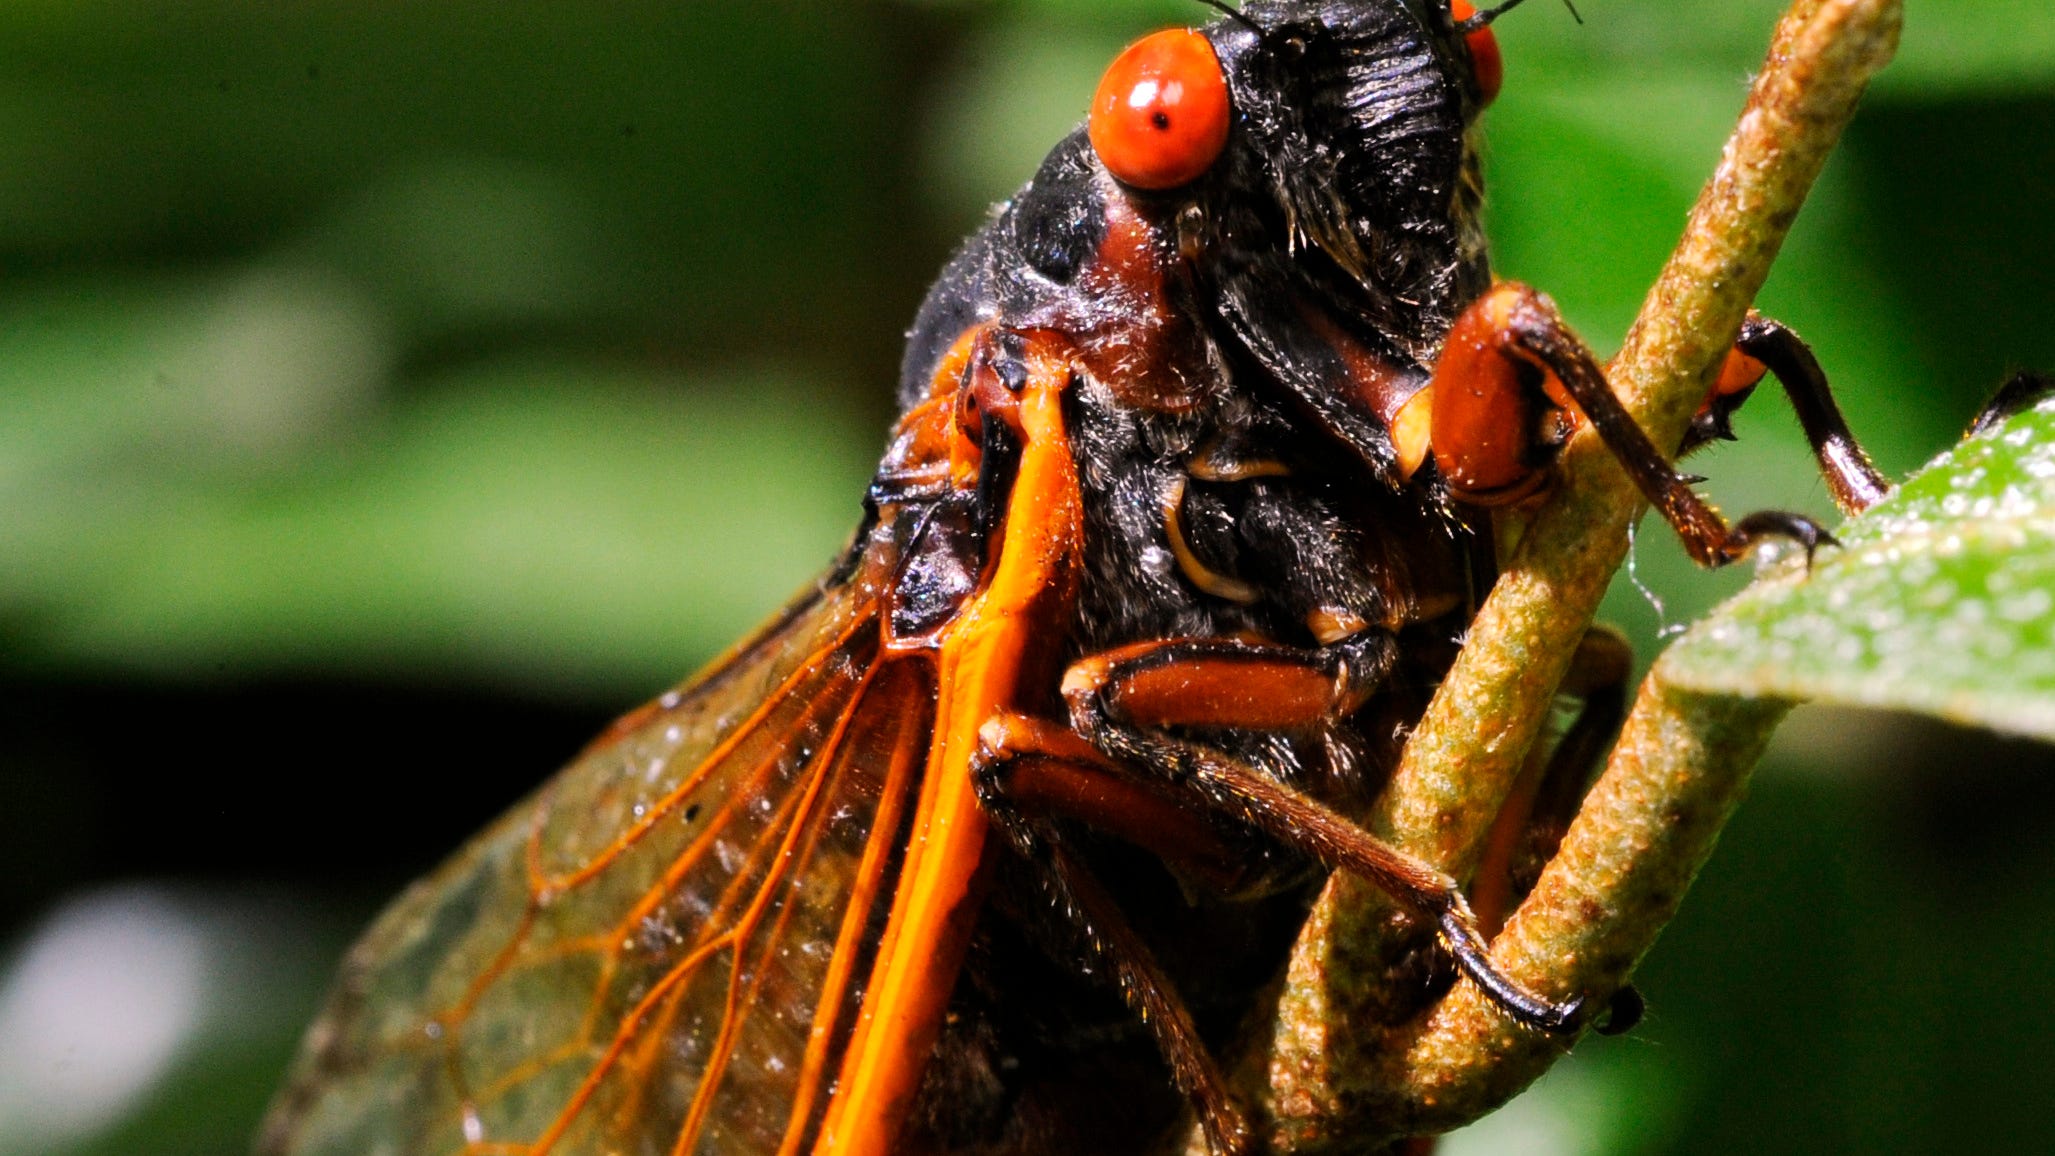 Cicada Brood X is coming in 2021. What does that mean for Cincinnati?